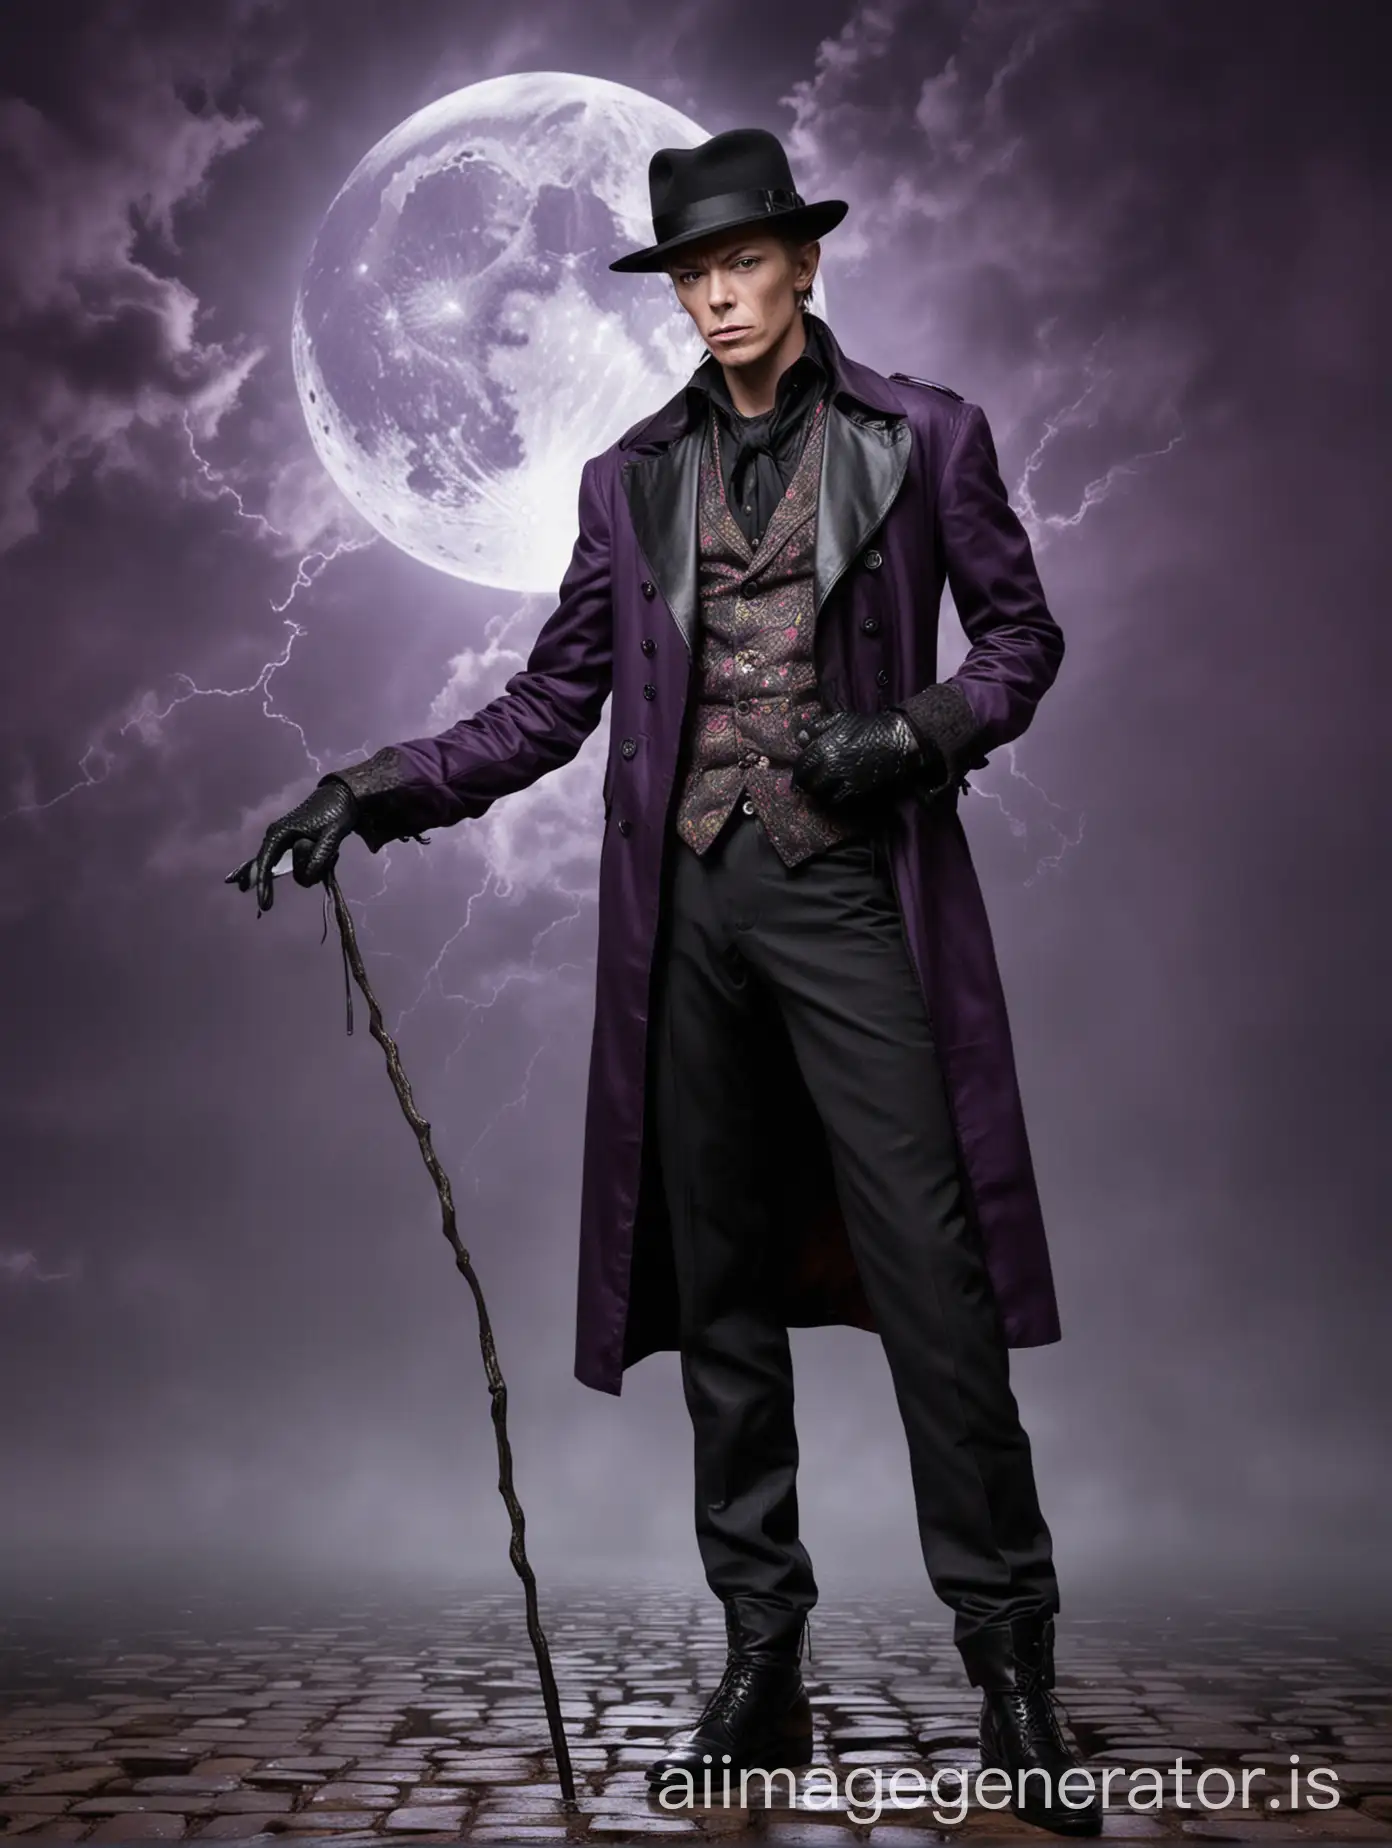 david bowie face in his teens, man wearing black leather gloves, black hair, disgust face expression, wearing black fedora hat, juvenile face,  slender young man with a black hair, man holding a black gentleman's cane with a silver handle, man wearing black linen suit, purple paisley vest,  midnight background with a stormy black clouds, crescent-shape moon, wet brickroad, old victorian city background, wet stone bricks